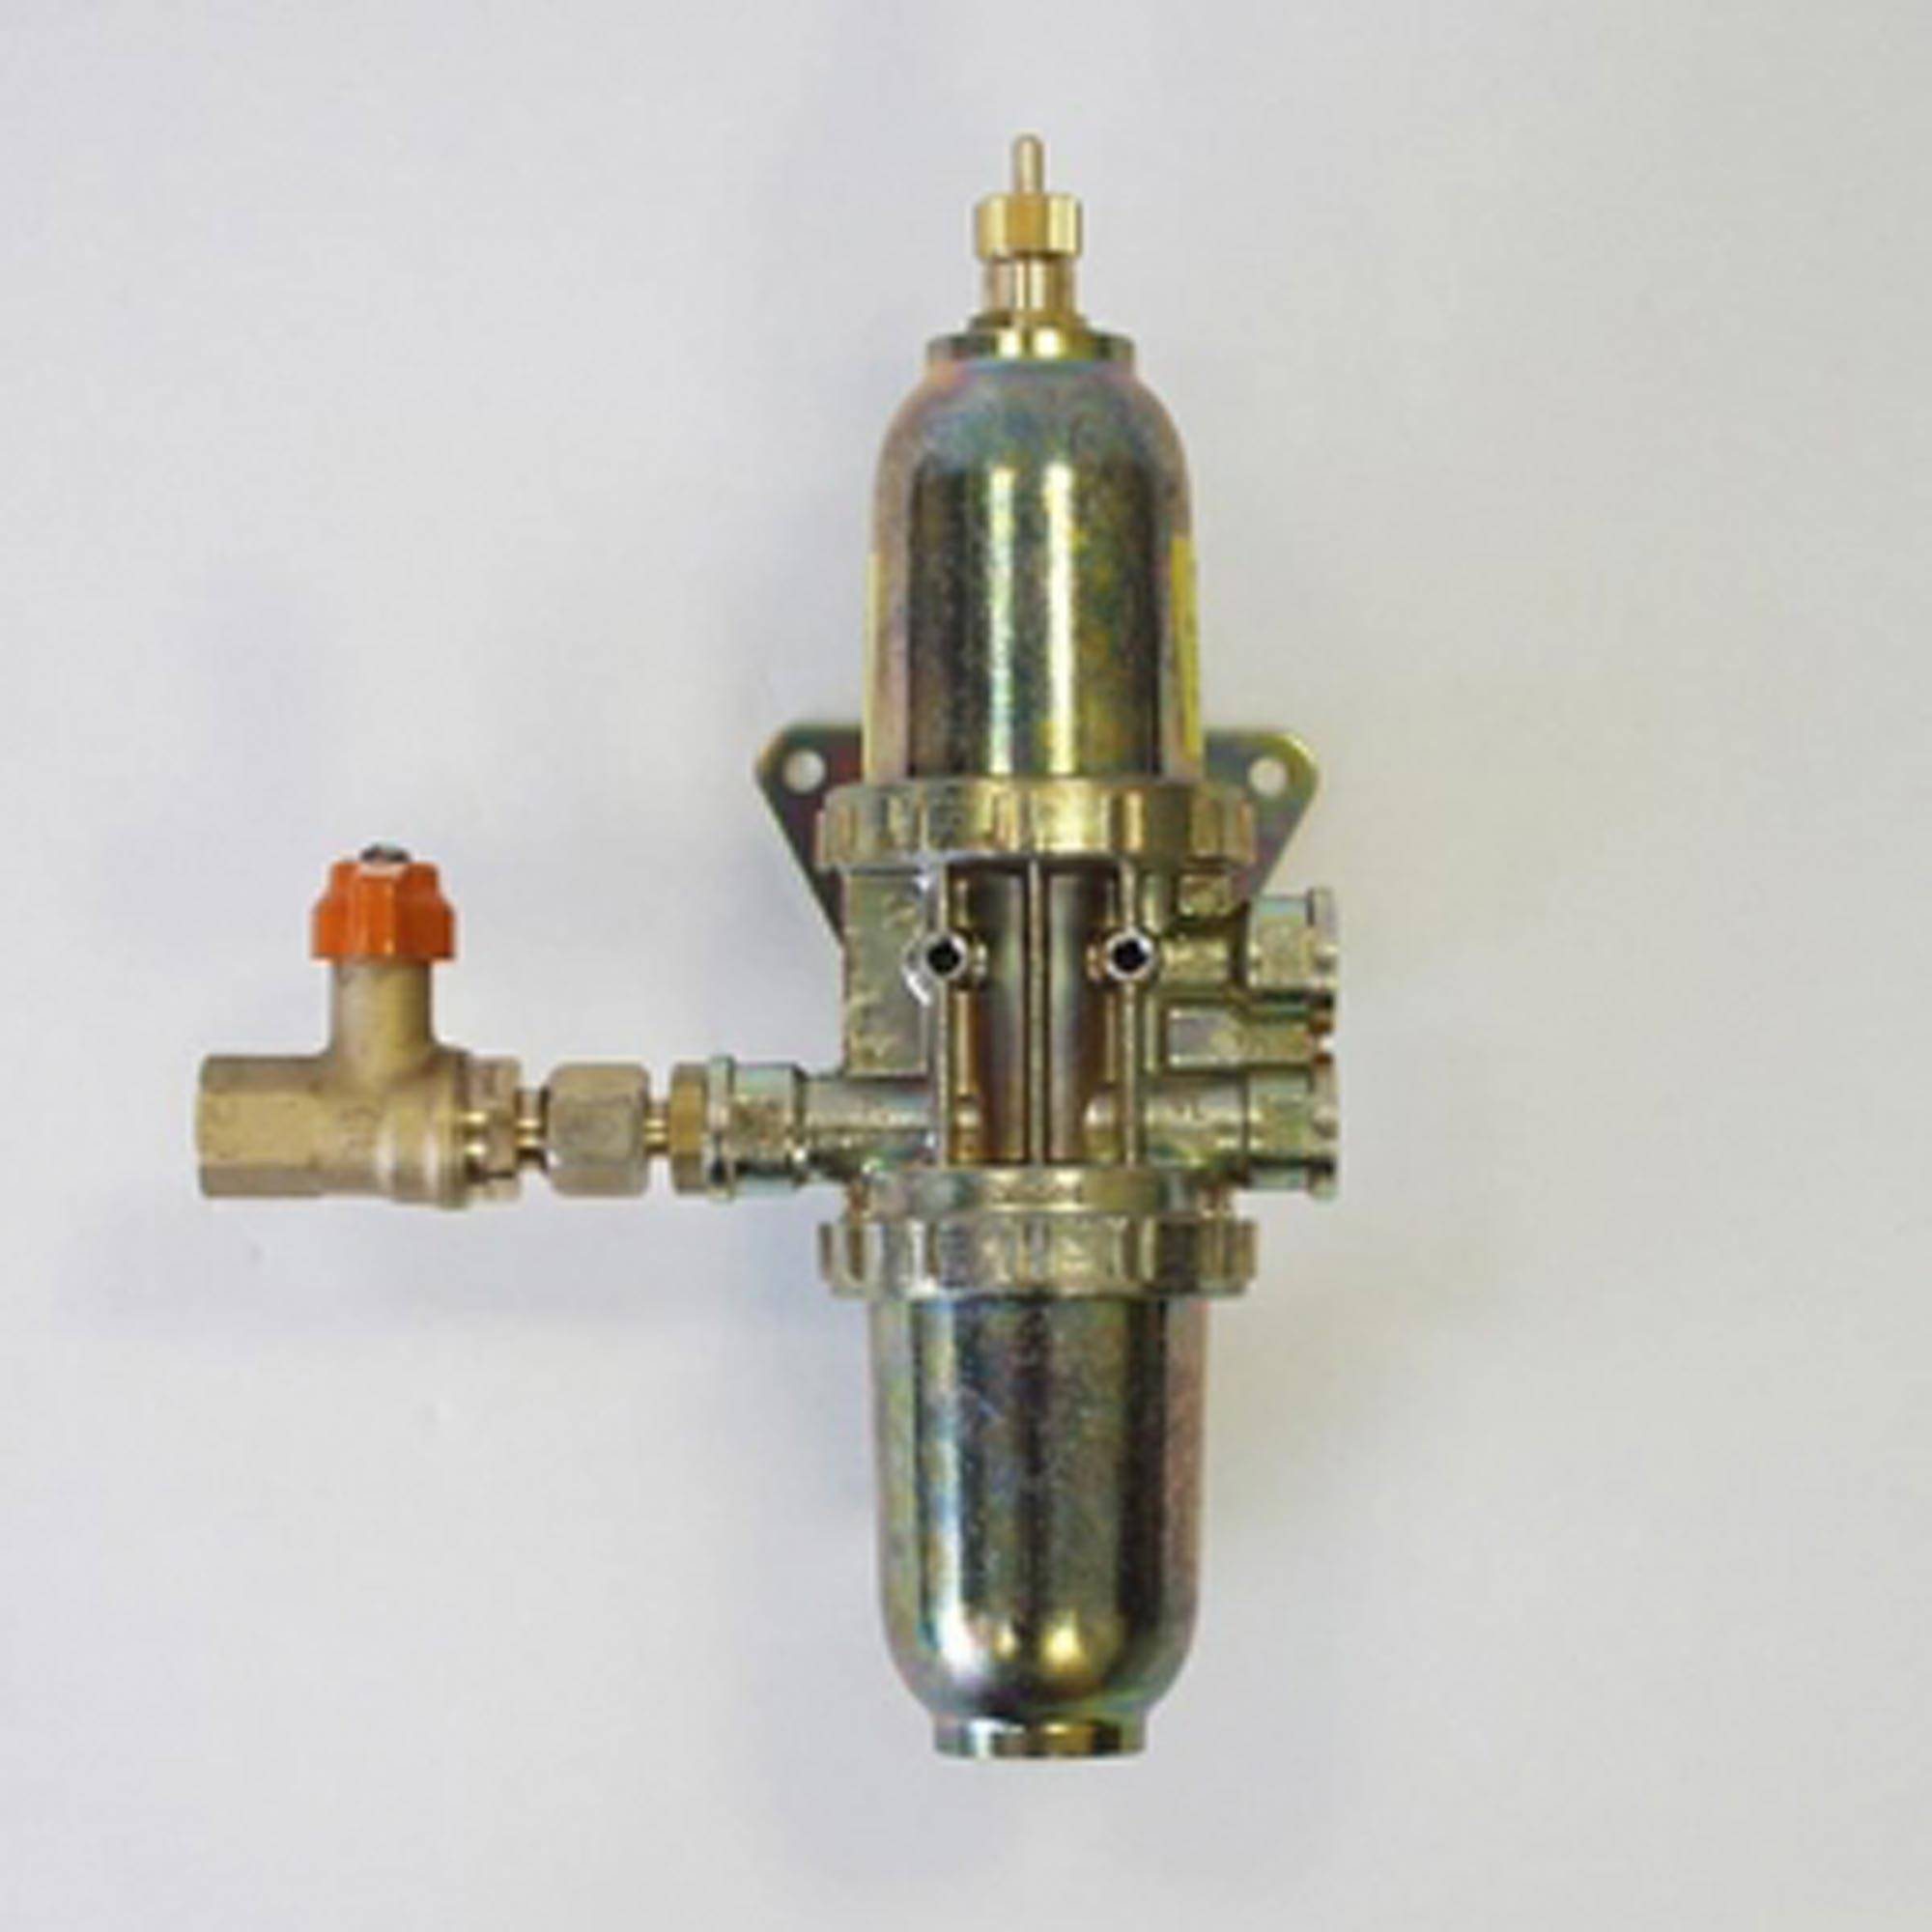 Gok Oil De Aerator With Integrated Filter Internal Fitting Fuel